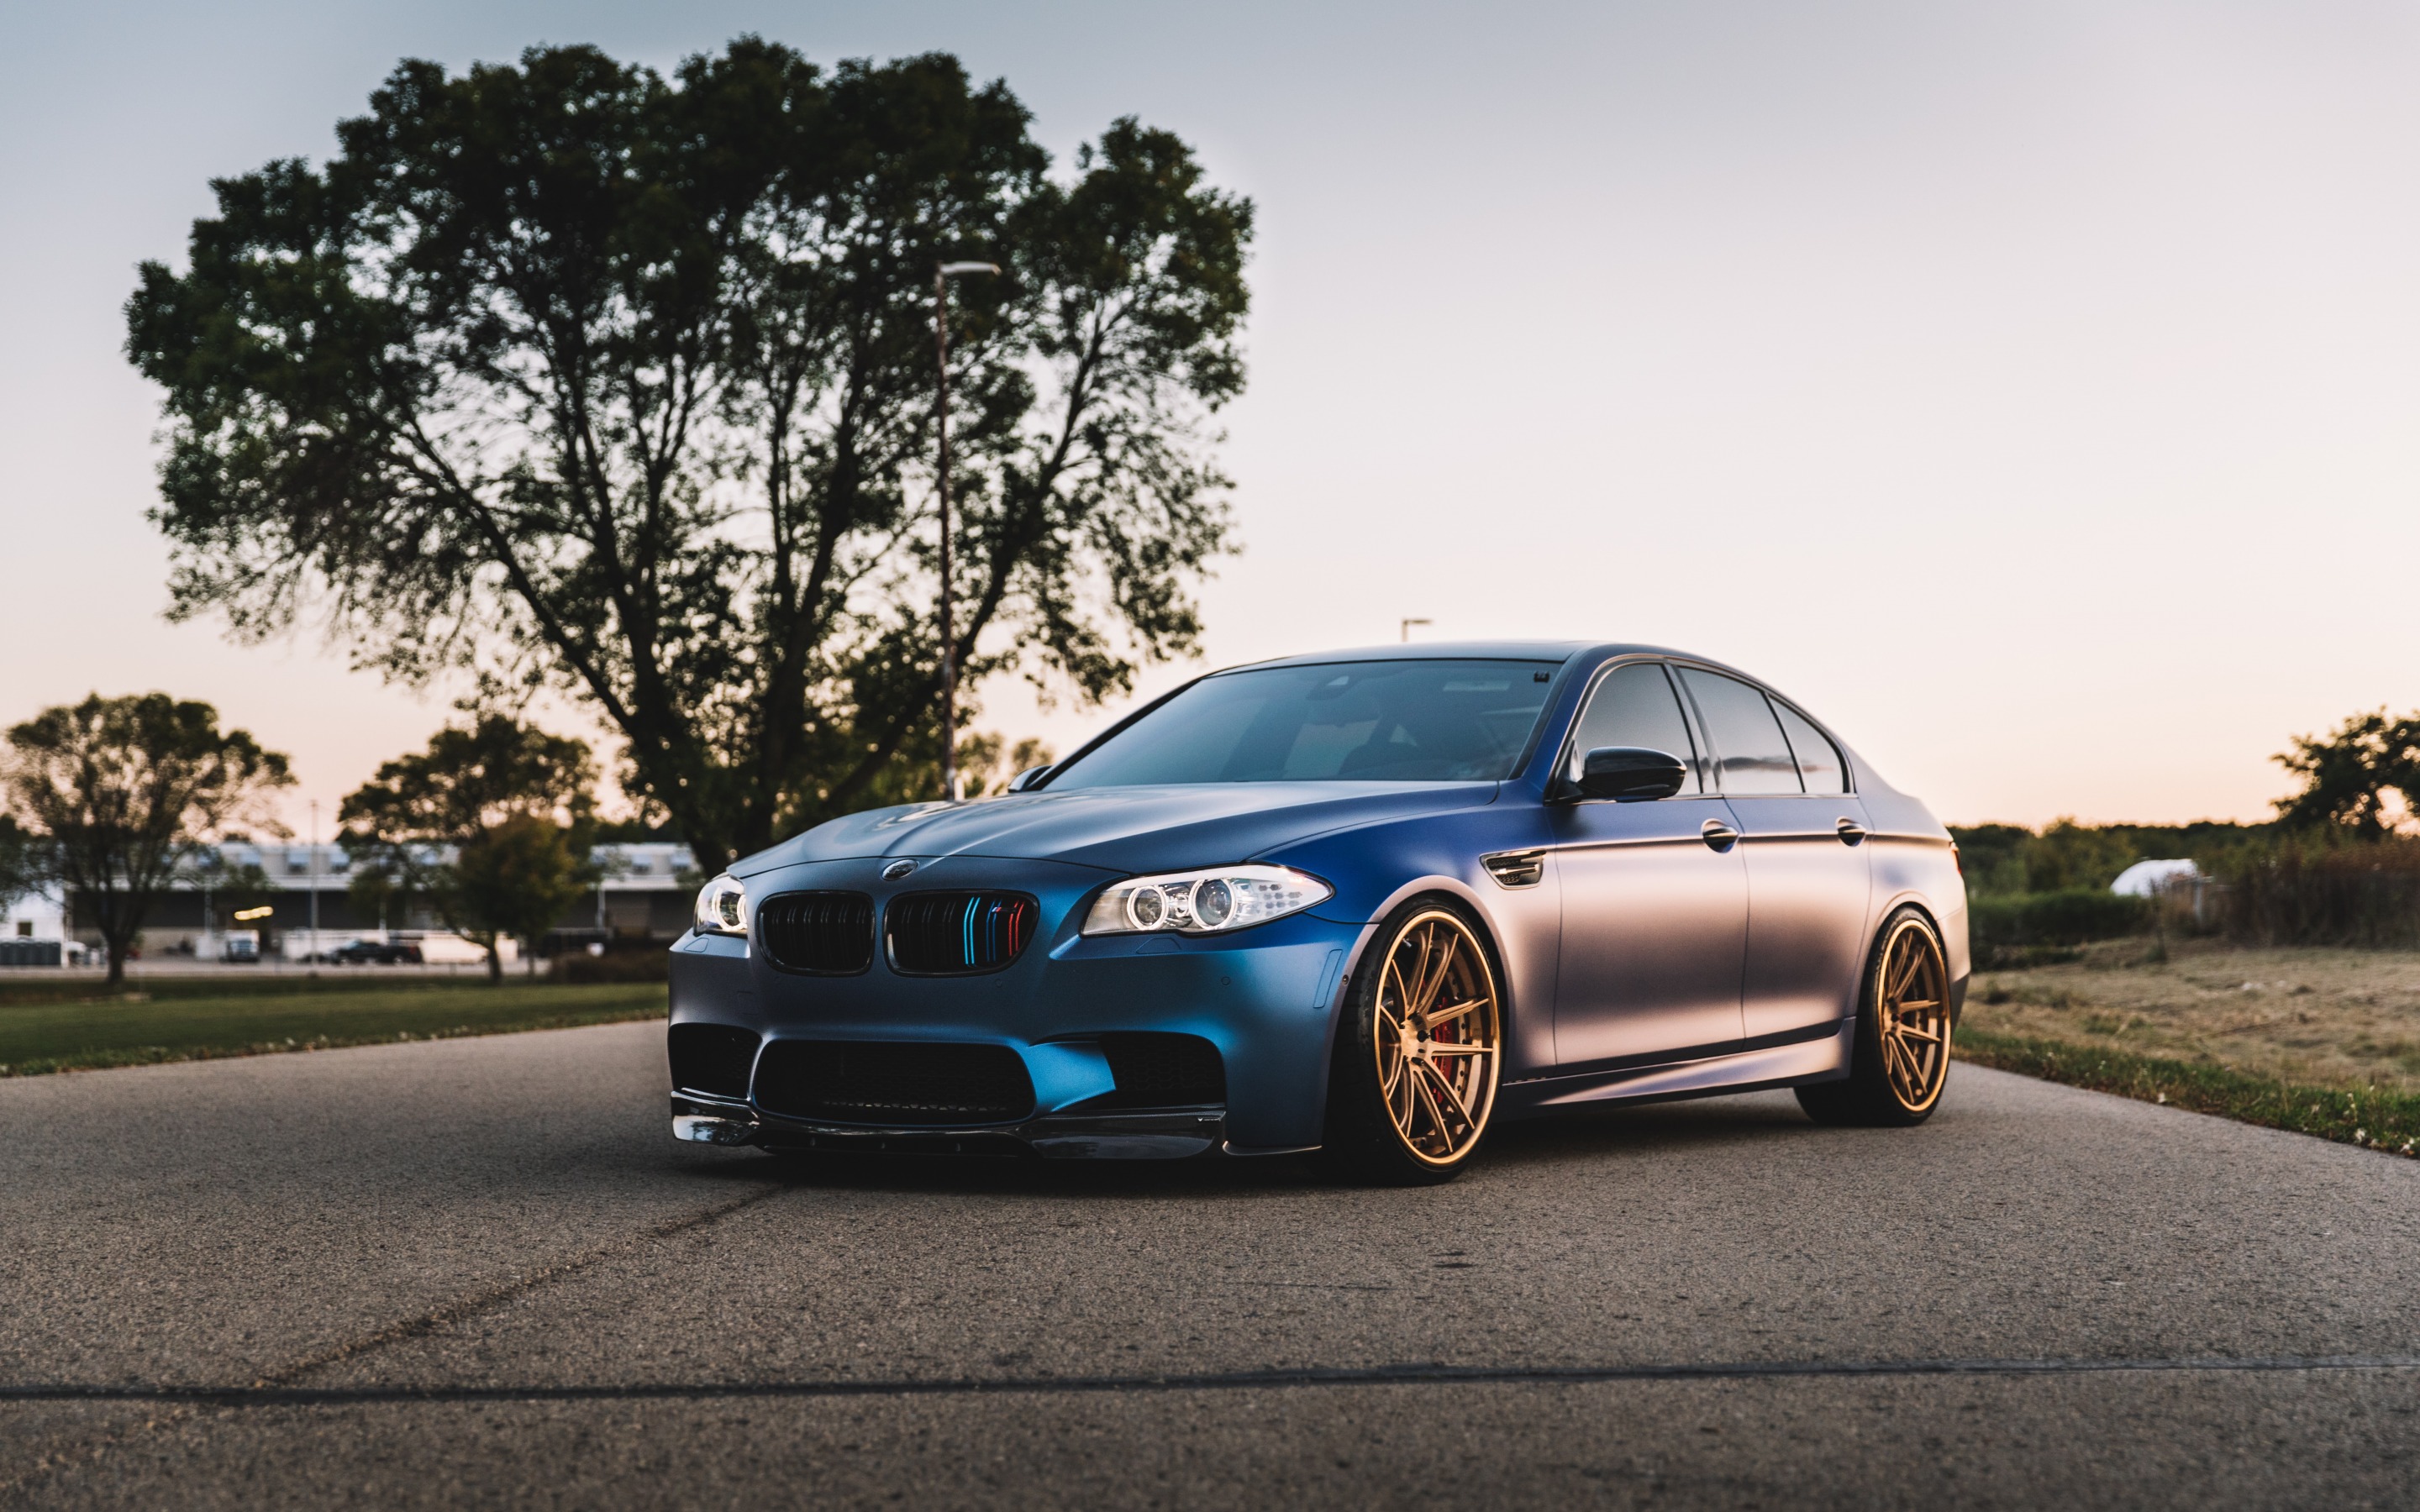 Download wallpaper BMW M F 5 Series, sports sedan, blue matte M bronze wheels, tuning M M package, BMW for desktop with resolution 2880x1800. High Quality HD picture wallpaper